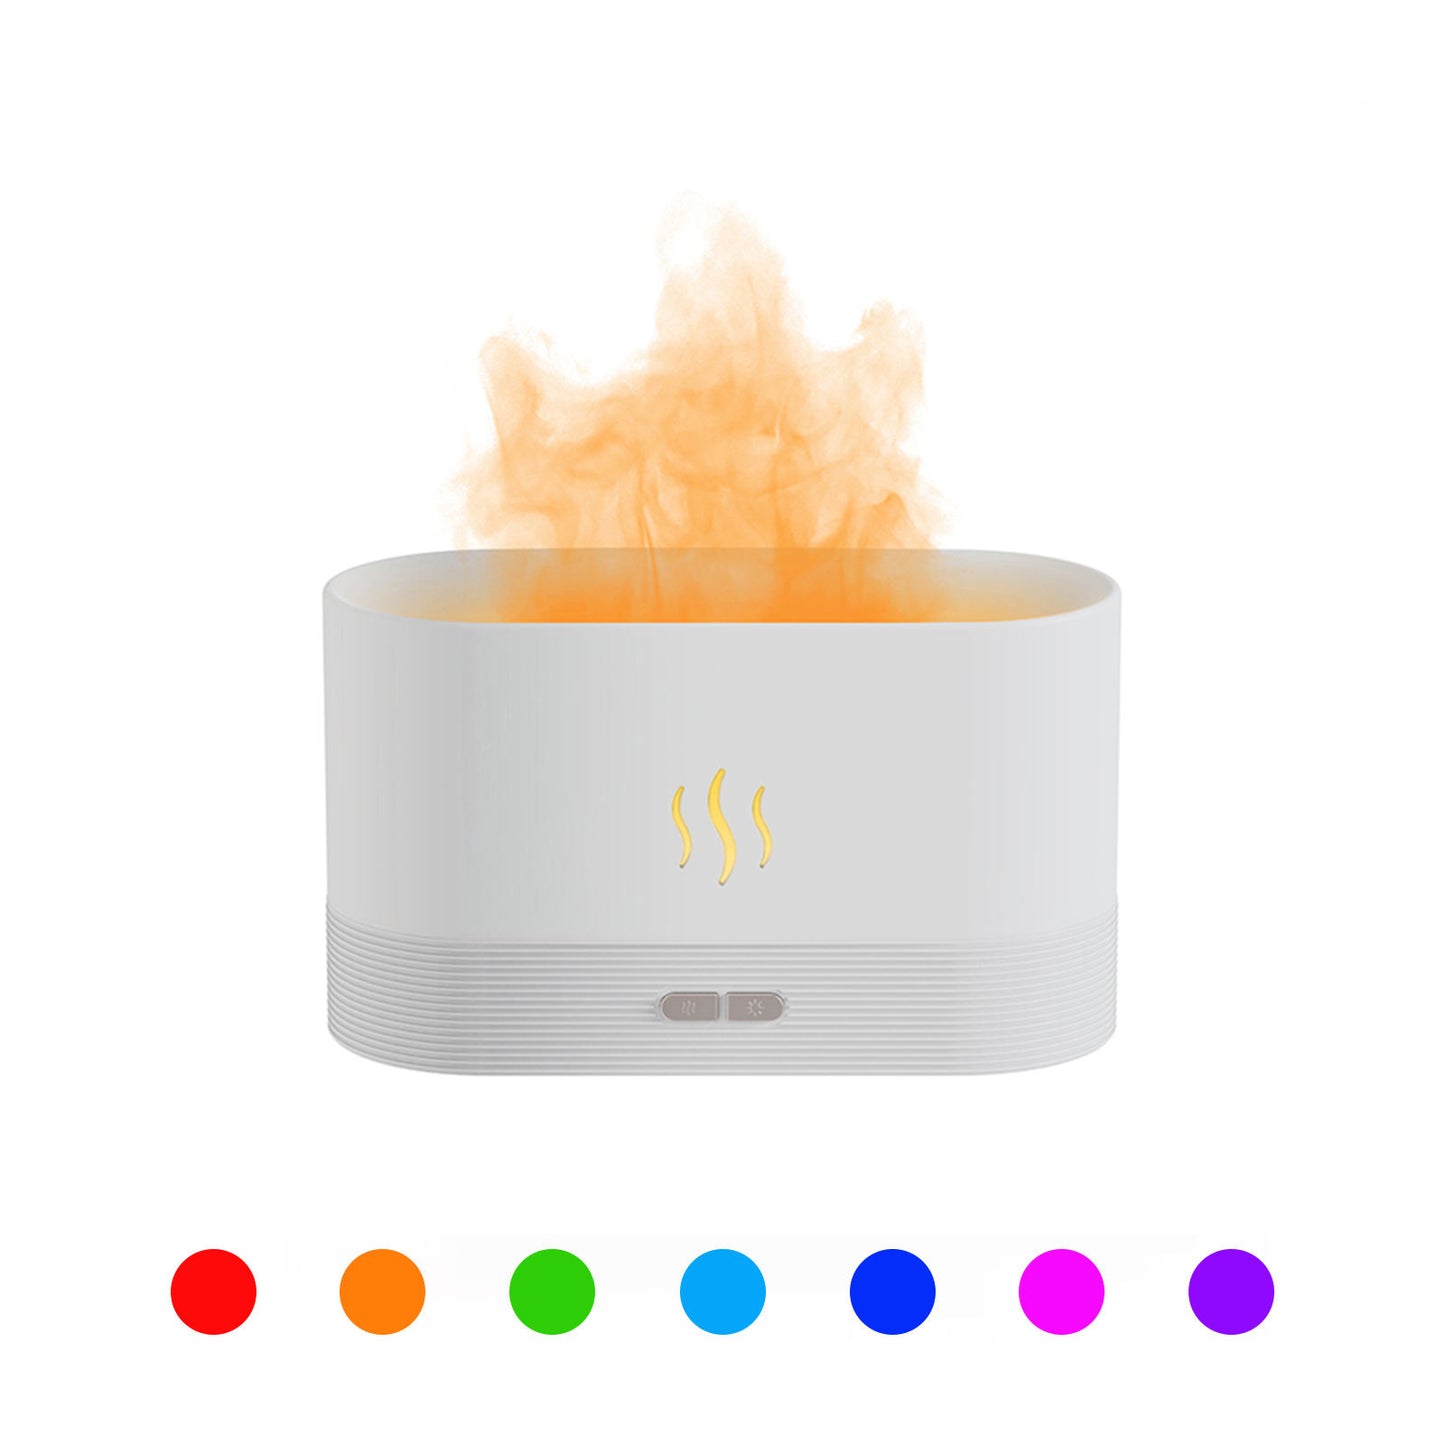 Best Selling USB Ultrasonic Flame Humidifier Led RGB Colorful Essential Oil Fire Flame Aroma Diffuser